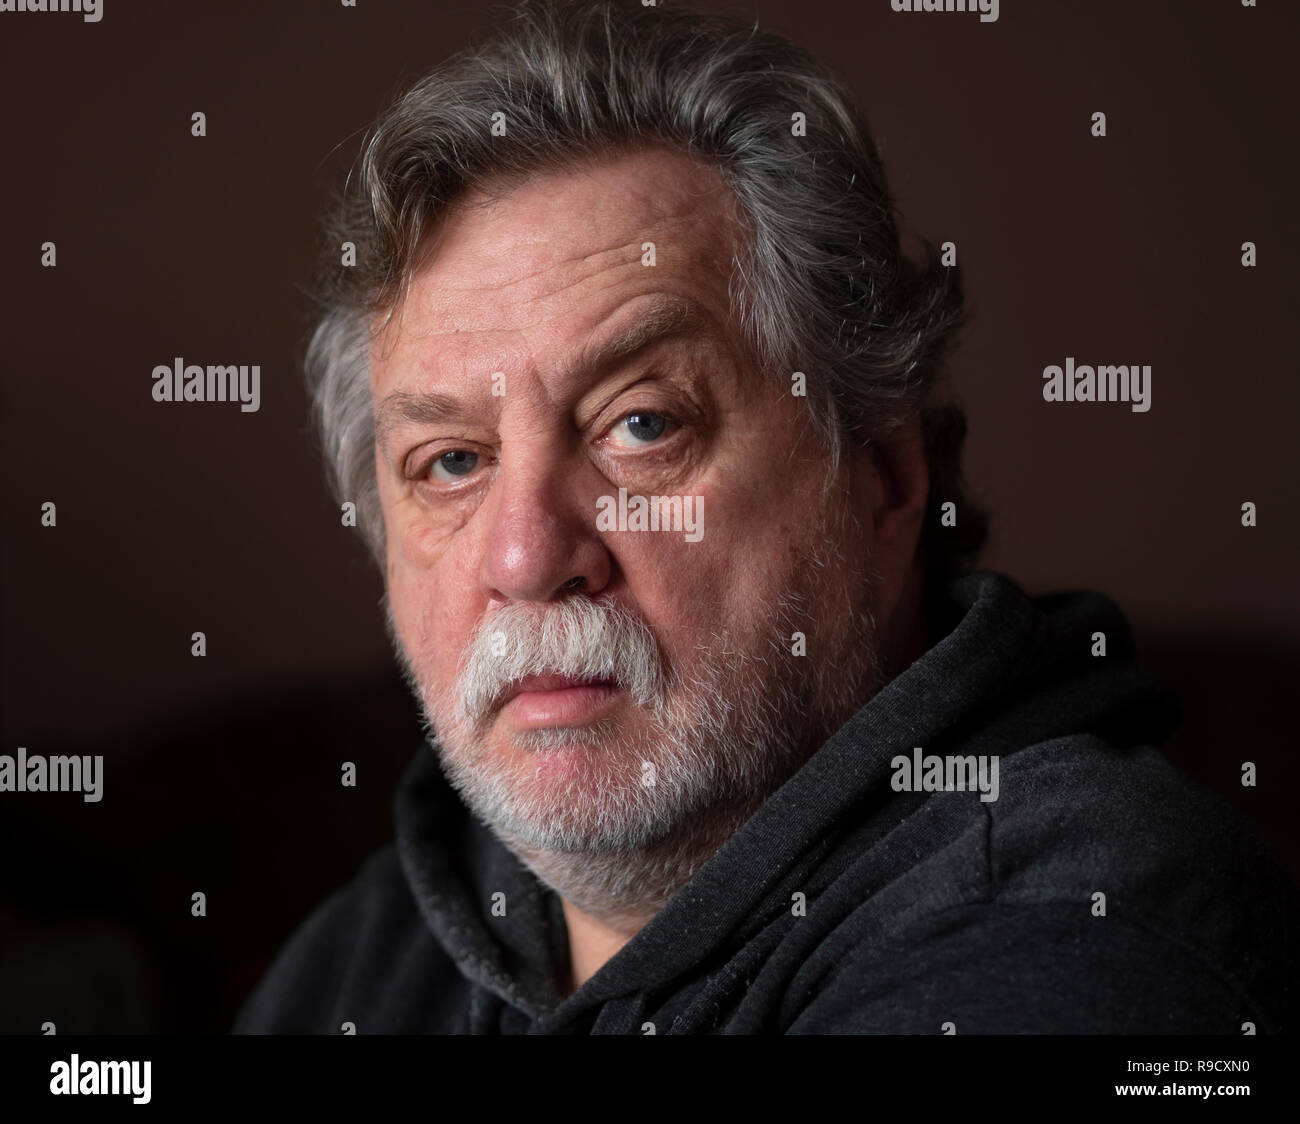 Portrait of Caucasian middle-aged man with a mustache and a beard on his face Stock Photo